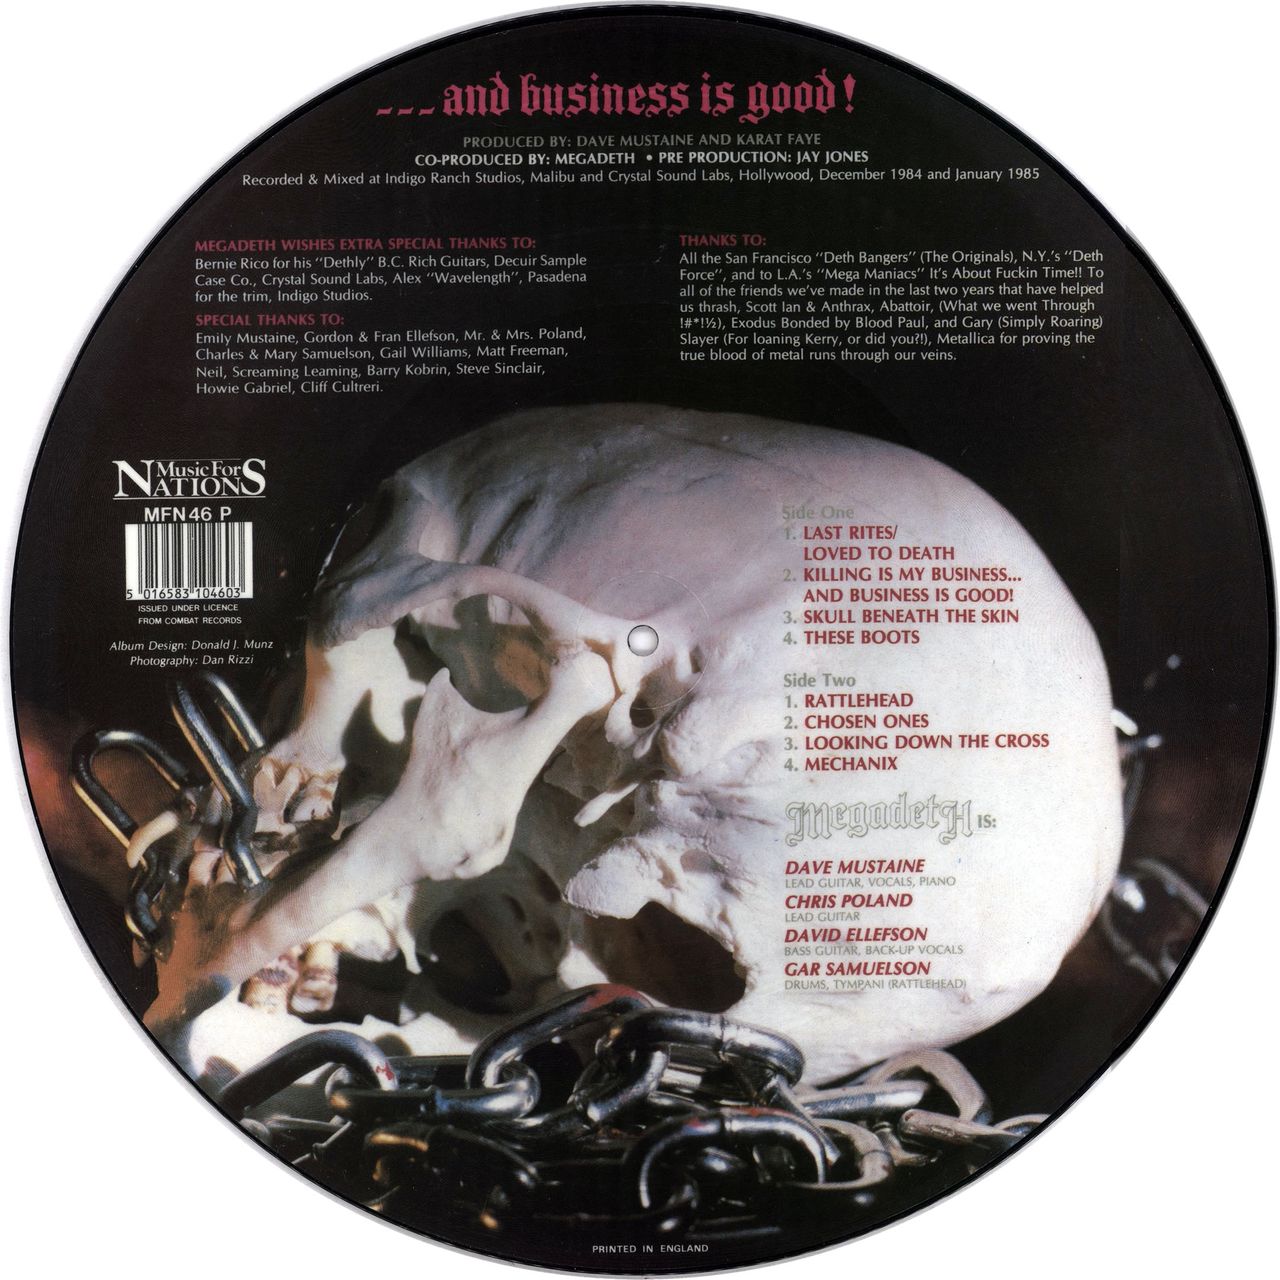 Megadeth Killing Is My Business... and Business Is Good! UK Picture disc LP